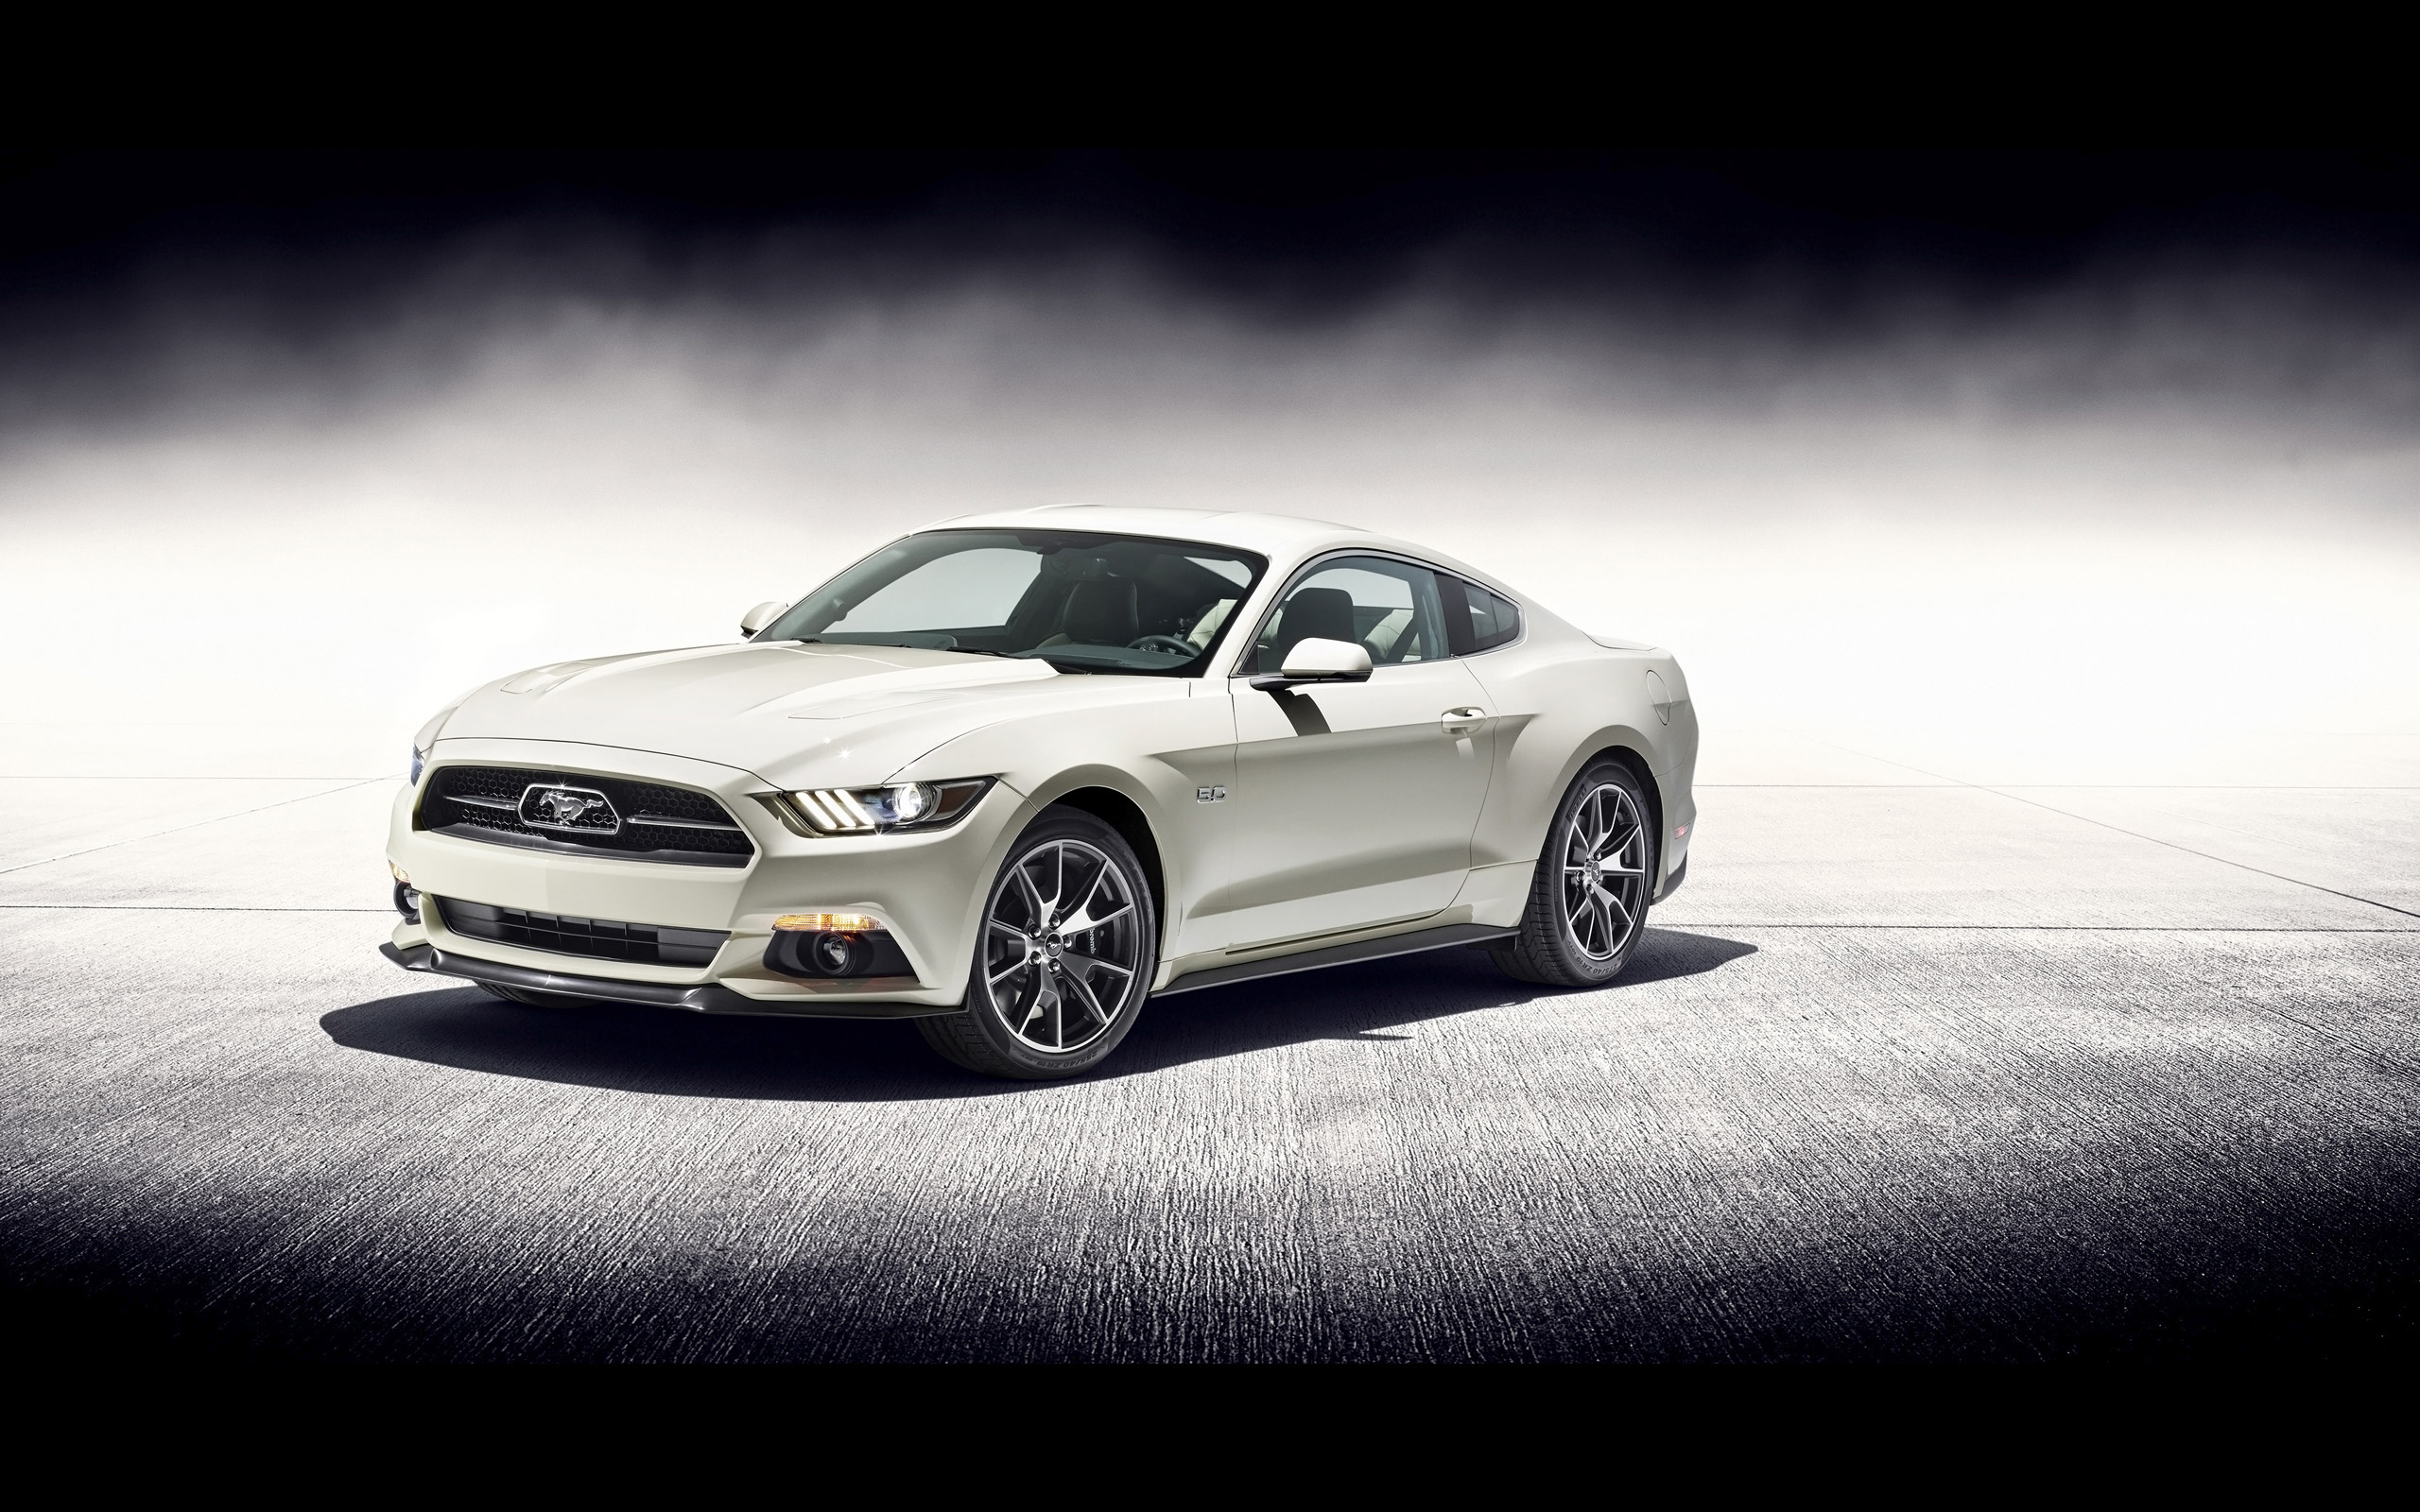 2015 Ford Mustang Gt Fastback 50 Year Limited Editionrelated Car Wallpapers Wallpaper Cars Wallpaper Better